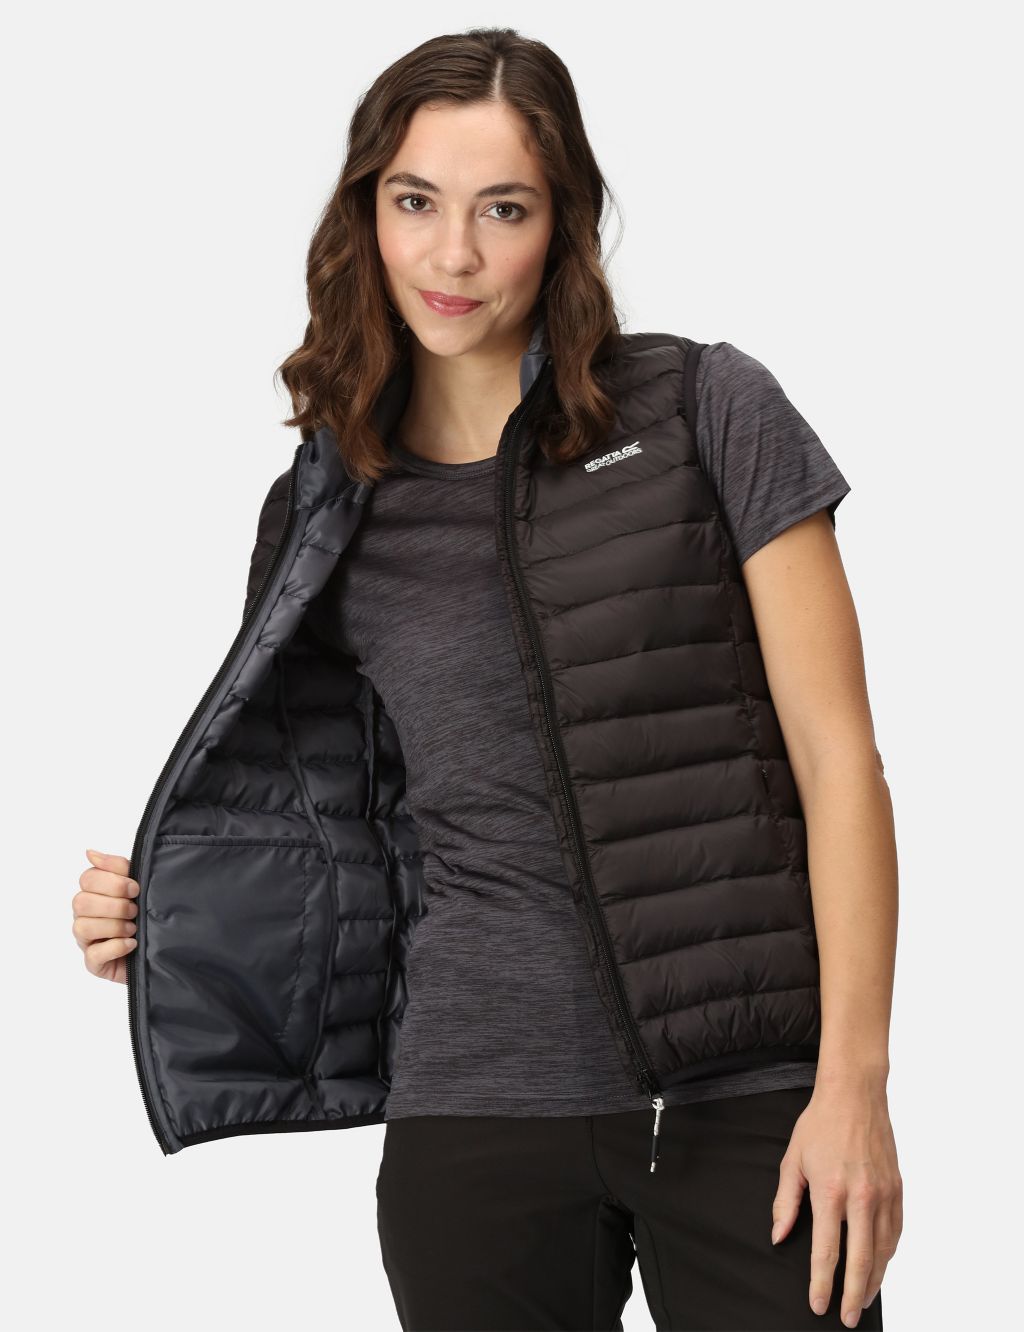 Marizion Water-Repellent Gilet image 5